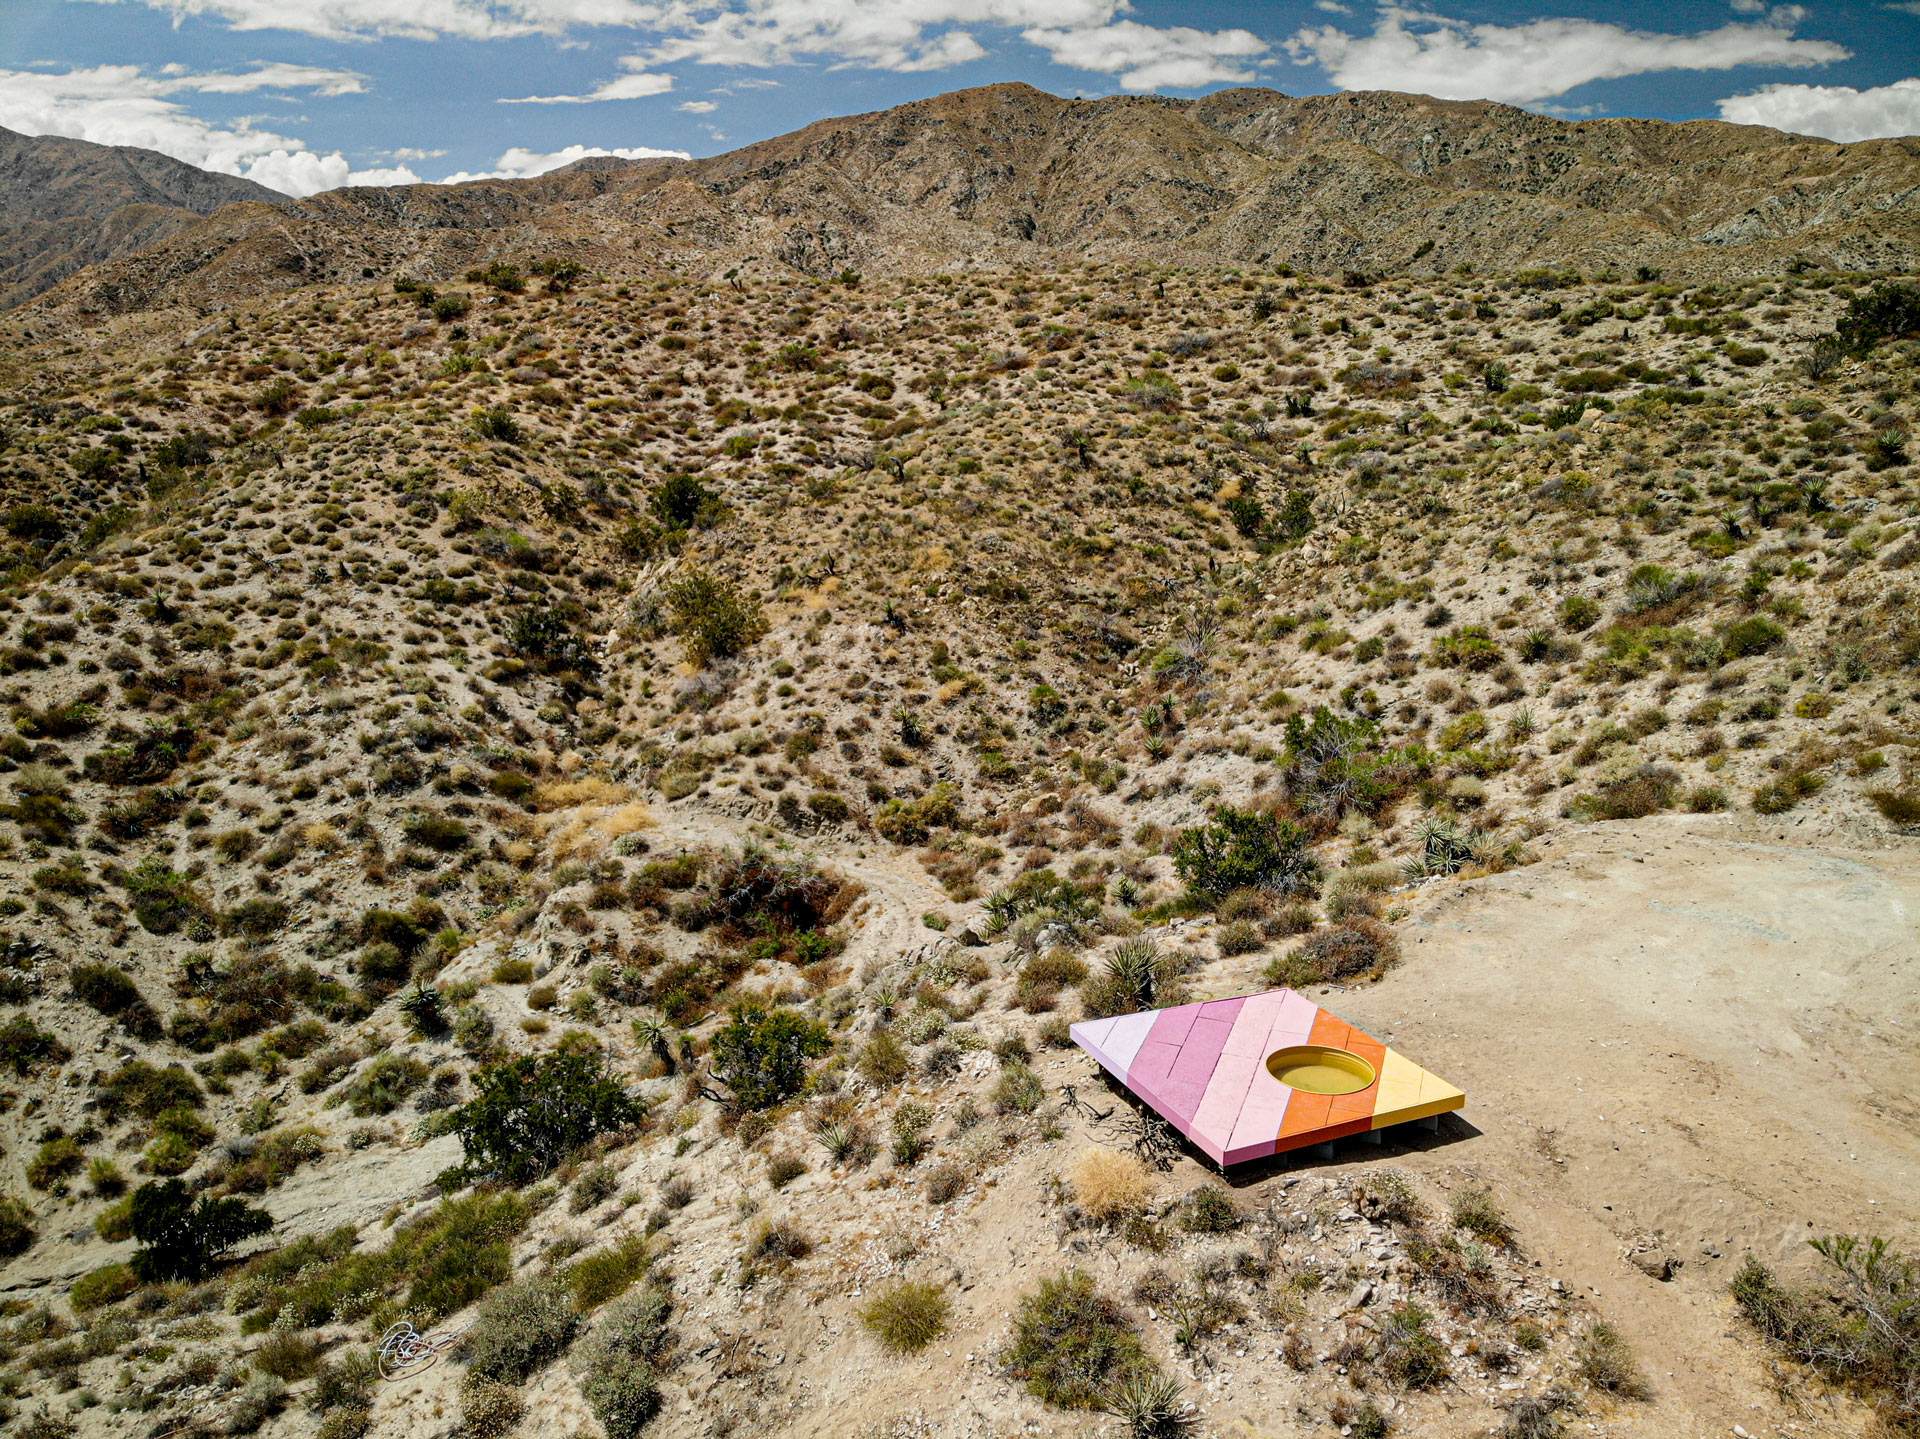 A vast valley with a desert, and a colorful board installation